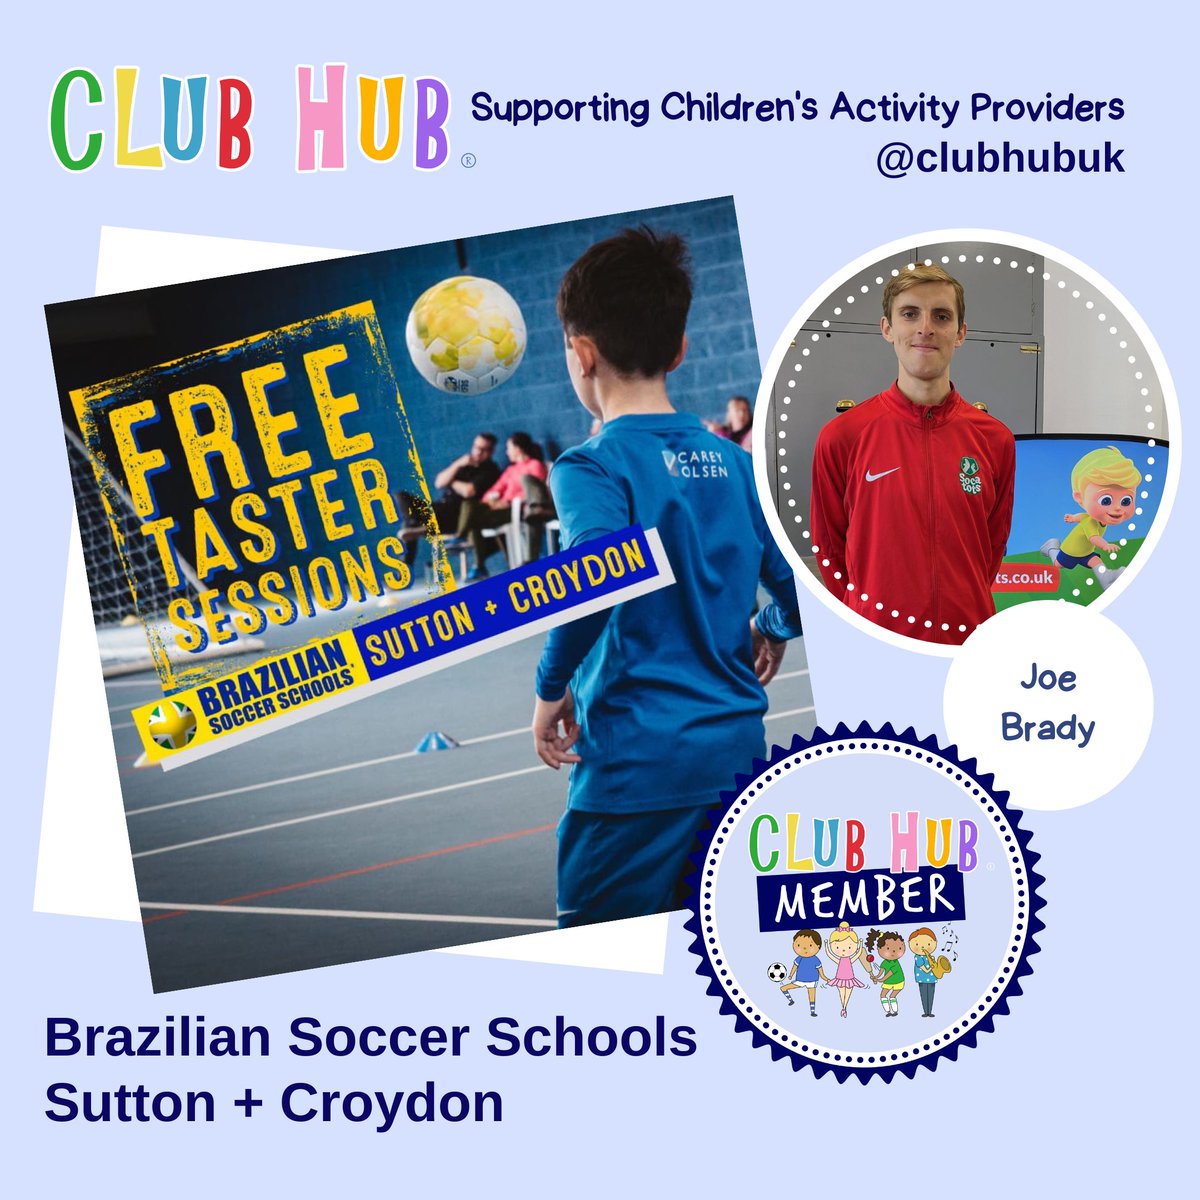 Check out Brazilian Soccer Schools Sutton Croydon Mondays at Carshalton High Schools for Girls Fridays at Sutton High School Email joe.brady@braziliansoccerschools.co.uk for more details. #ClubHubMember #Sutton #Carshalton #Croydon #BrazilianSoccerSchools